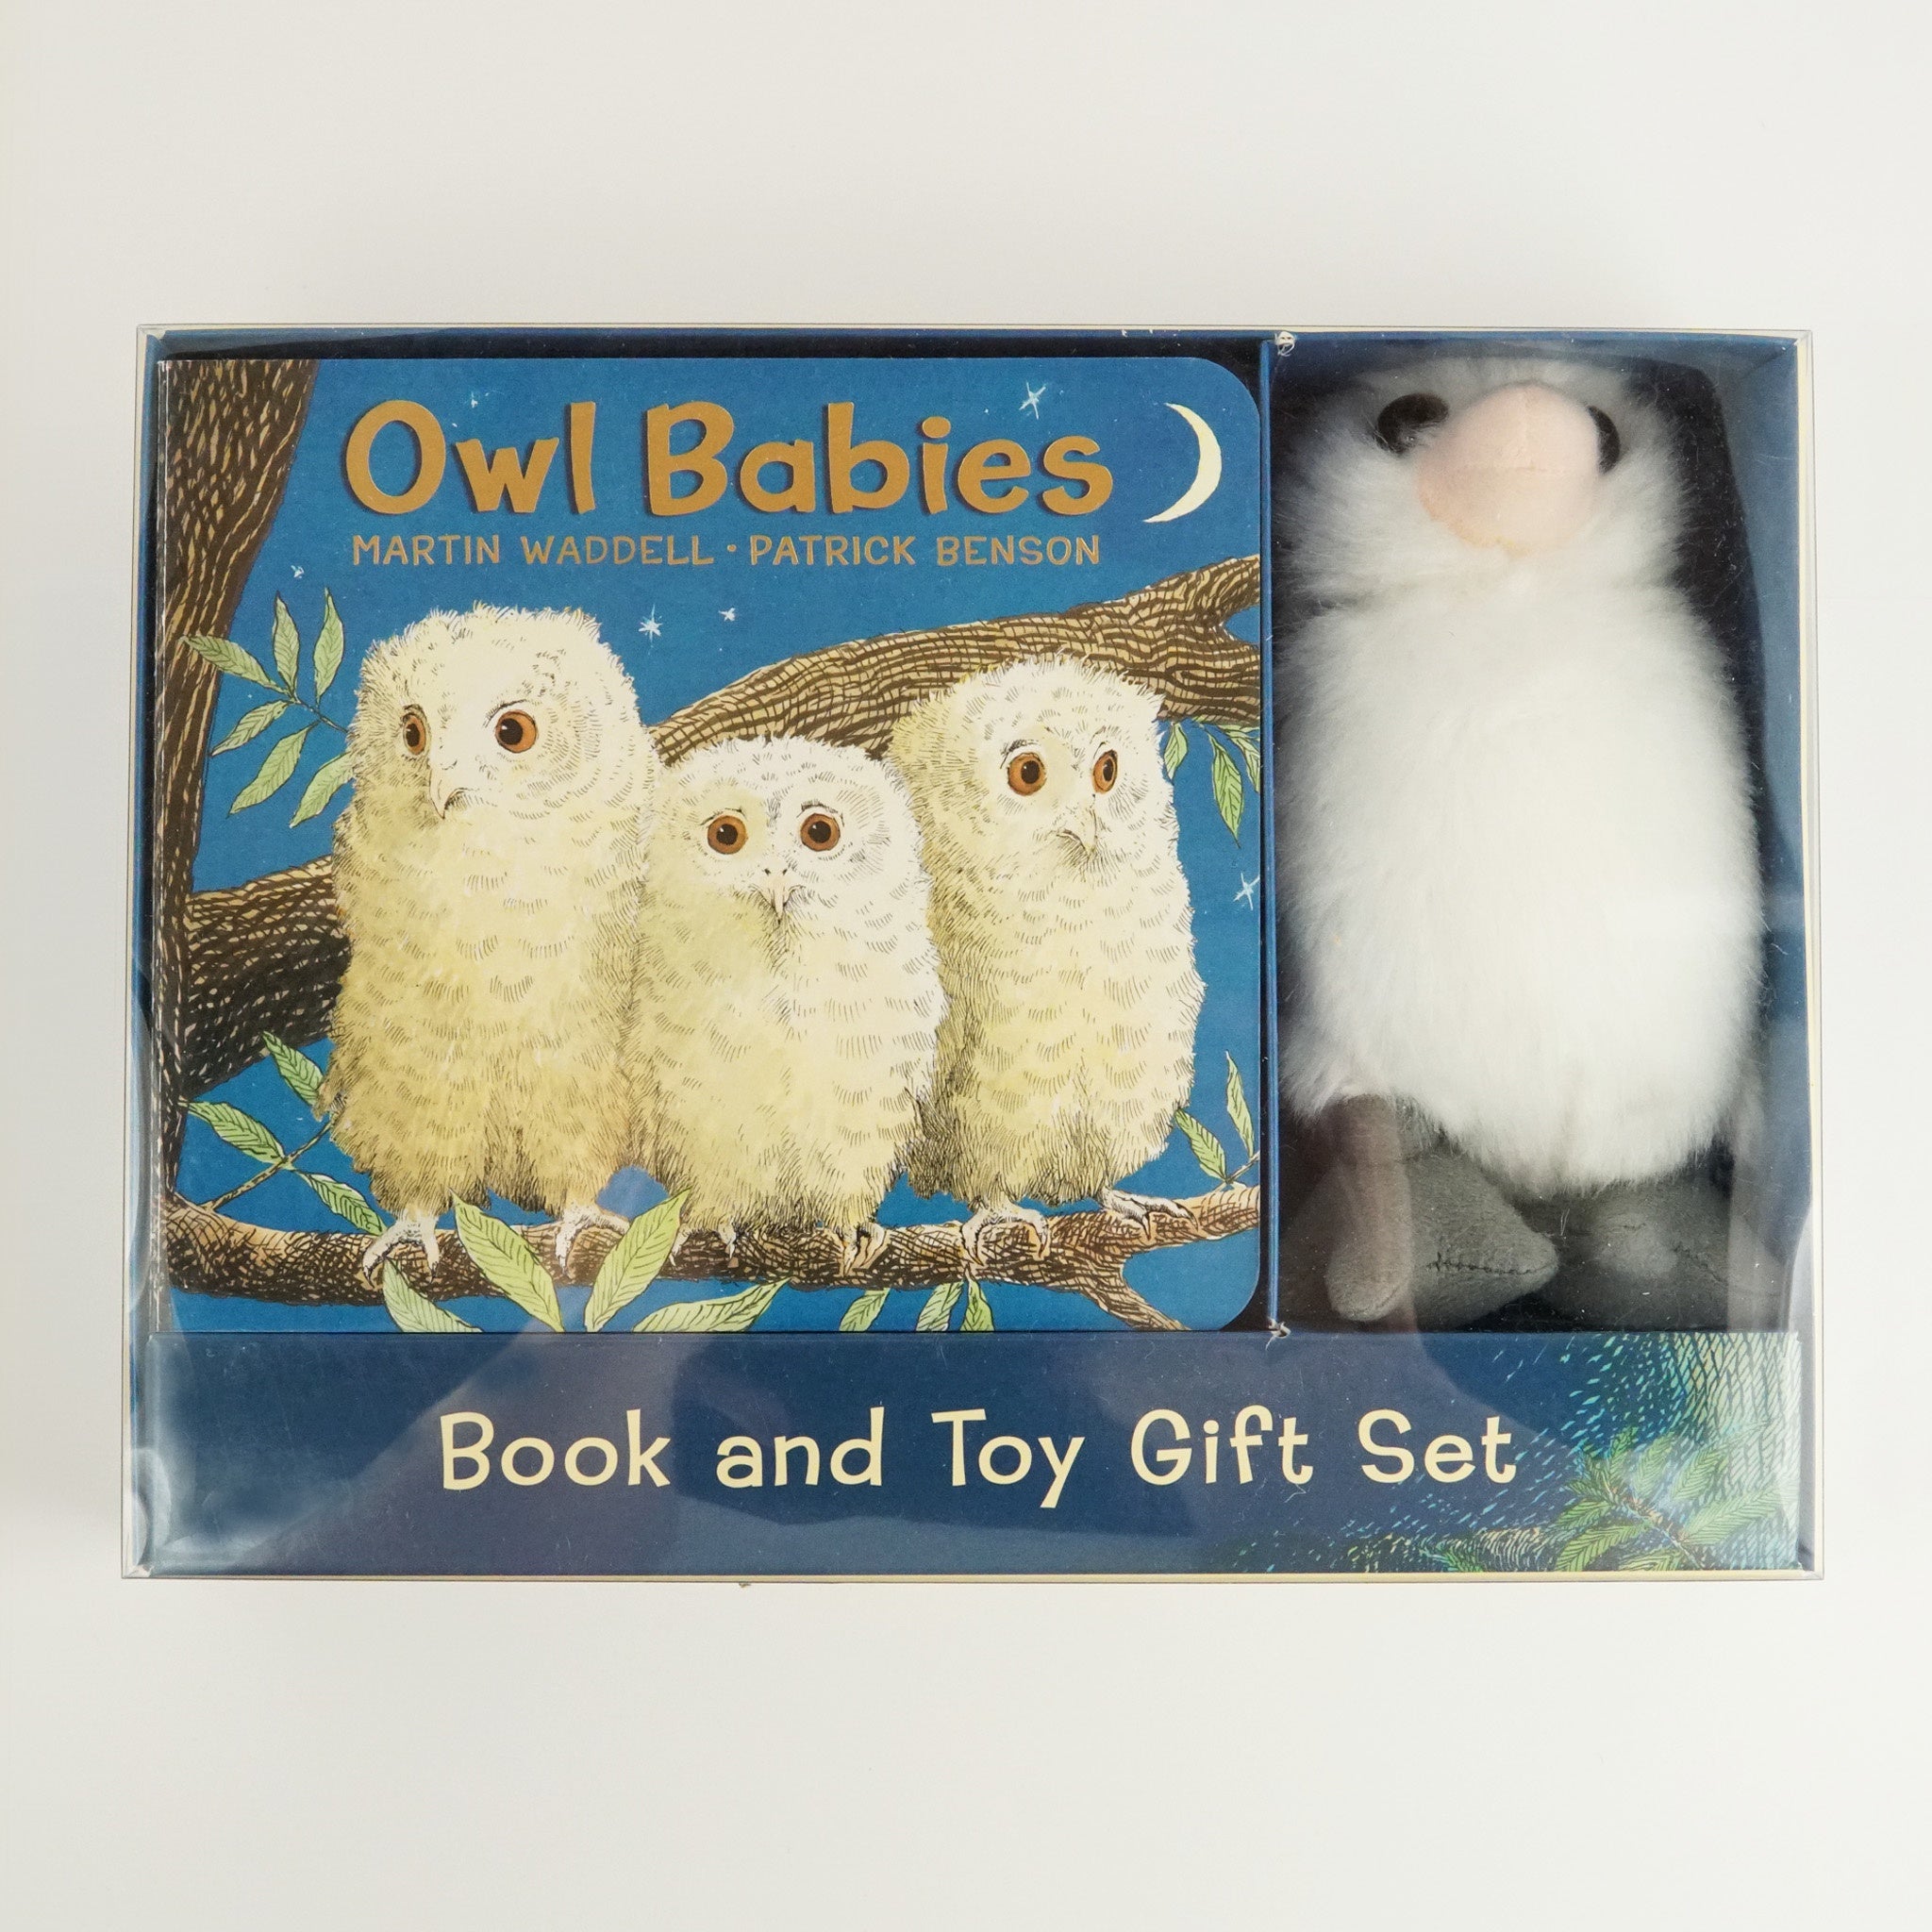 DISC BK 20 OWL BABIES GIFT SET BY MARTIN WADDELL, PATRICK BENSON #11850 D2 MAY23